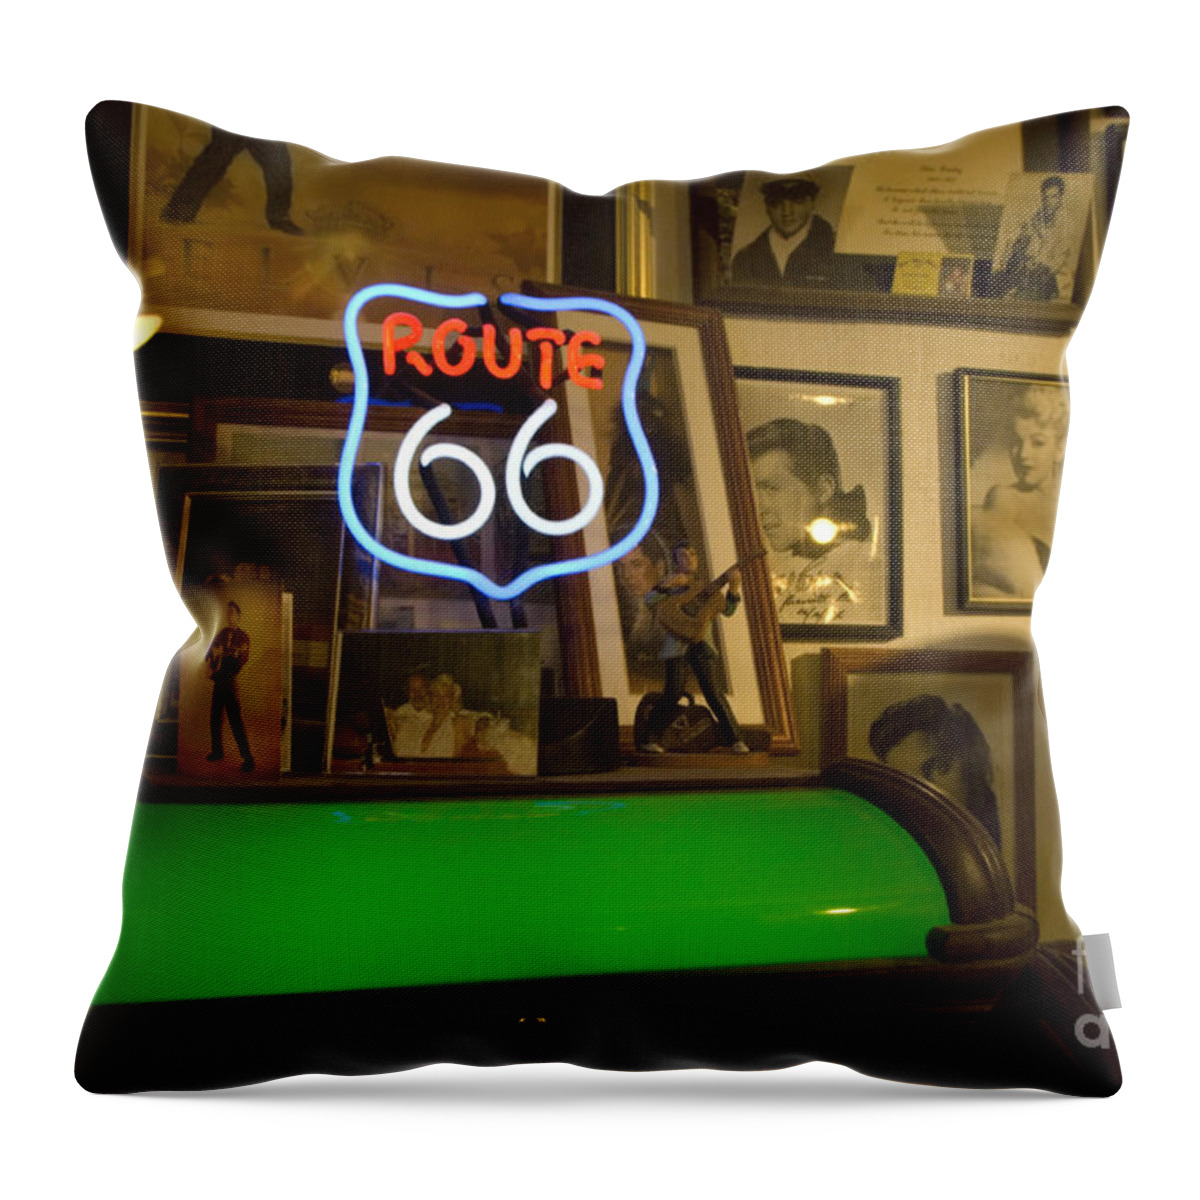 Flames Throw Pillow featuring the photograph Route 66 Neon Sign 1 by Bob Christopher